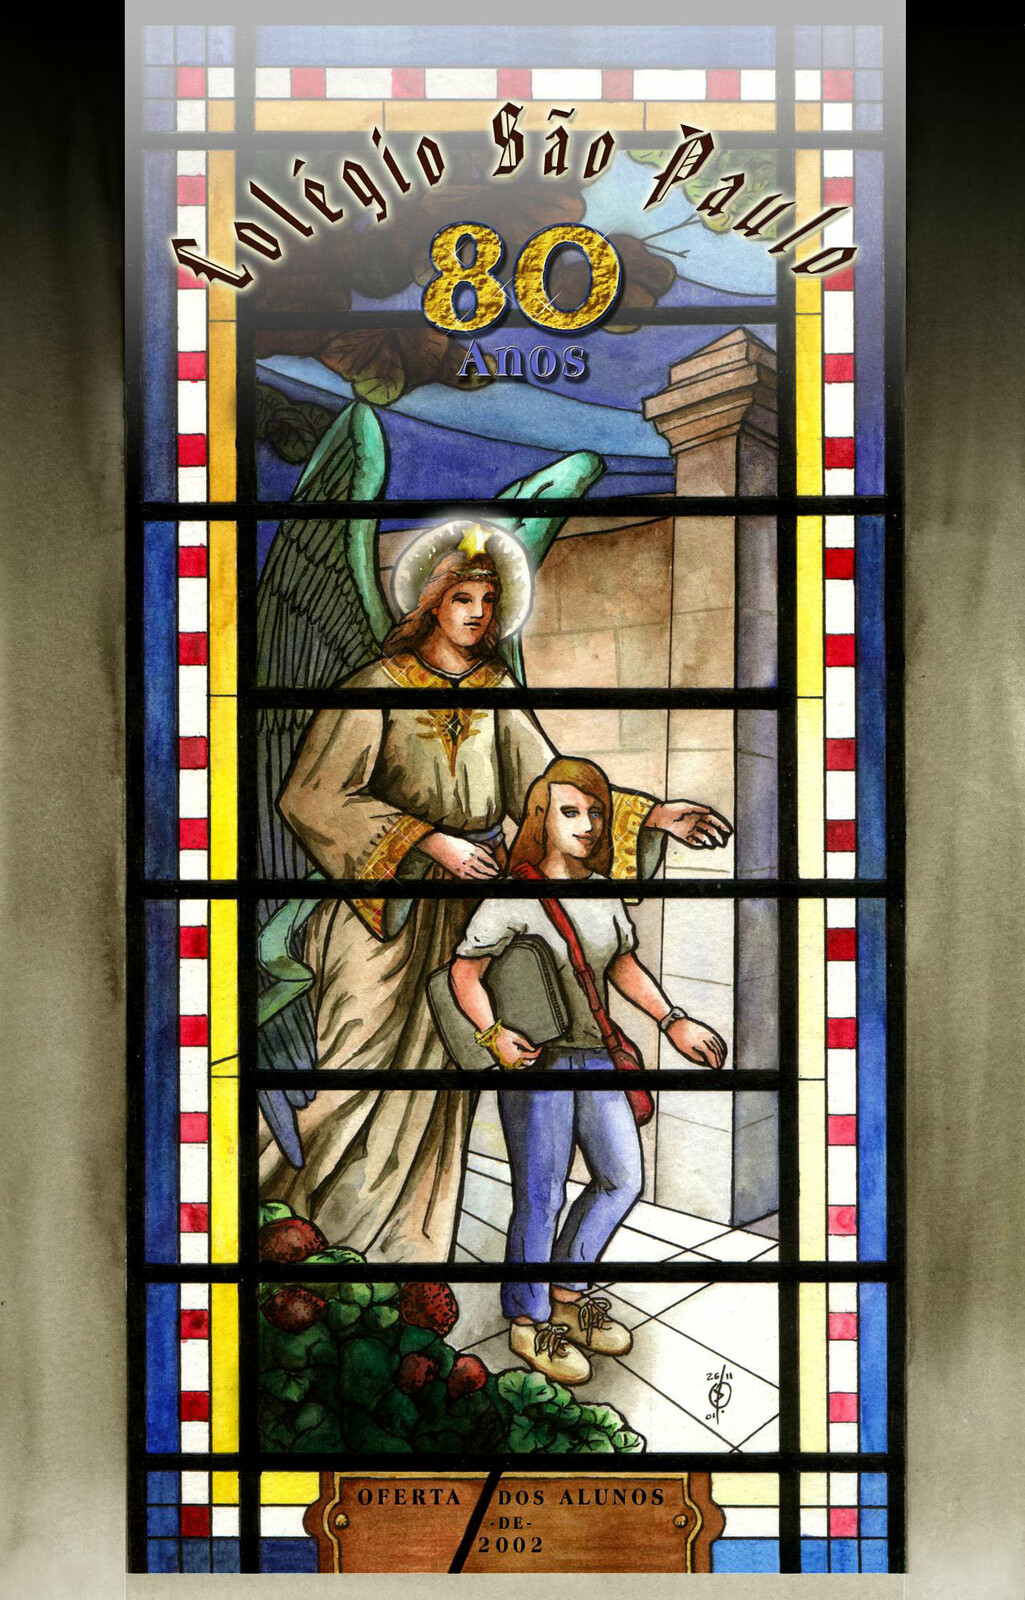 Cover for the highschool's calendar, based on its church's main vitral.